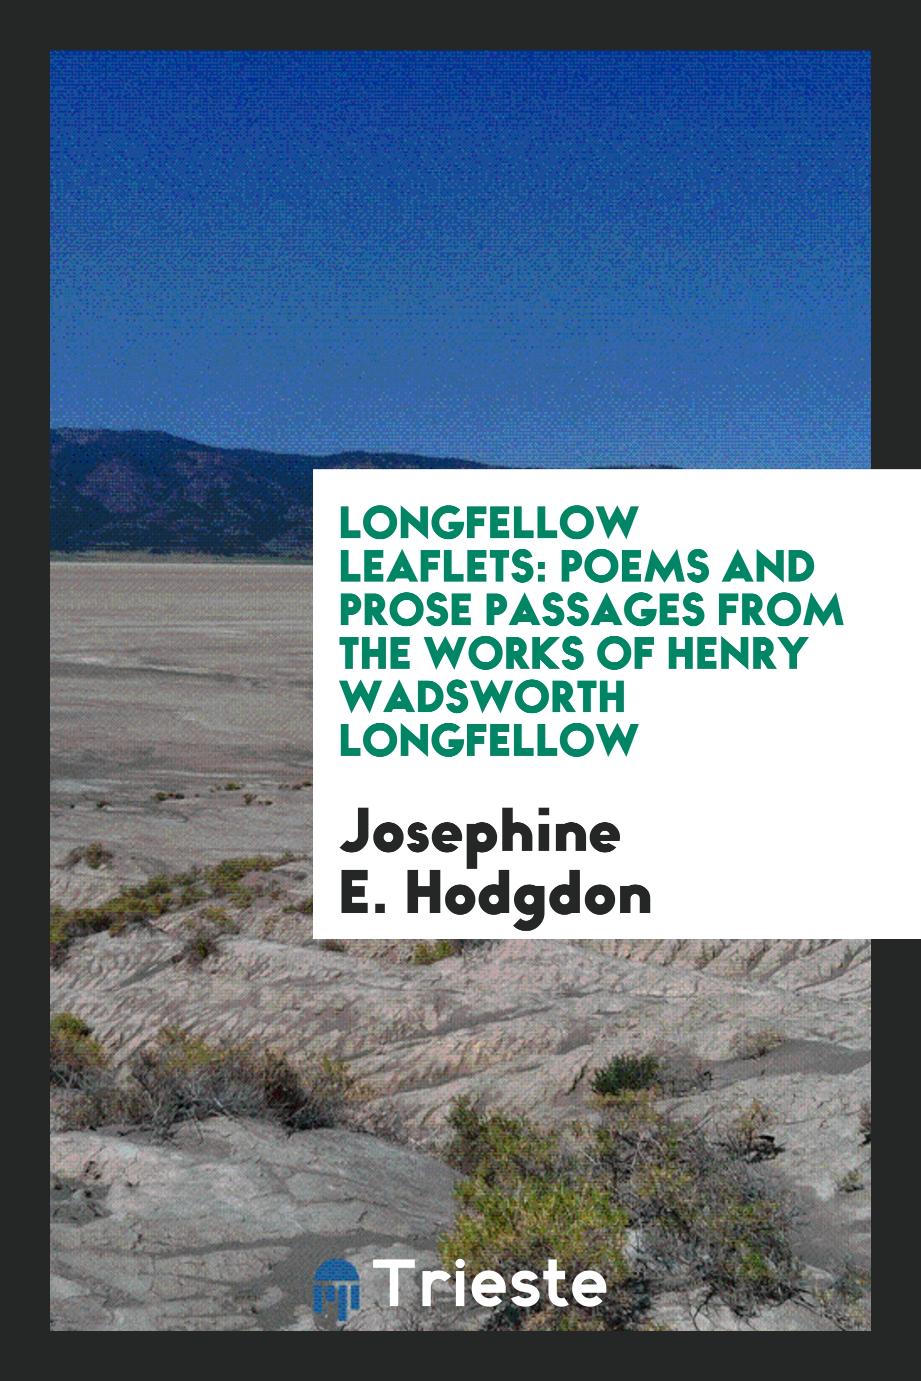 Longfellow Leaflets: Poems and Prose Passages From the Works of Henry Wadsworth Longfellow